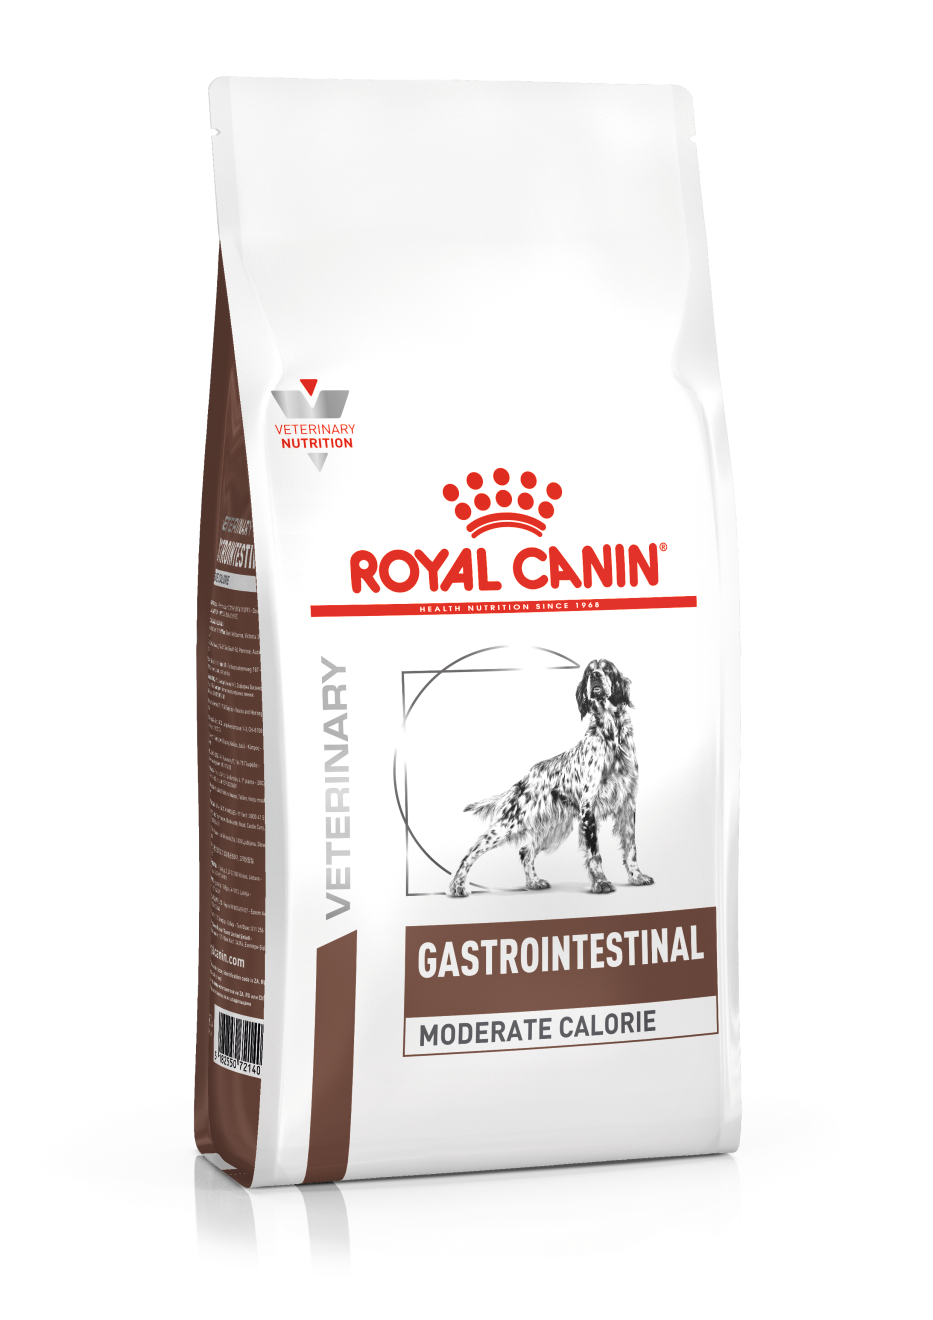 Royal Canin Gastro Intestinal Moderate Calorie hond  2 kg 